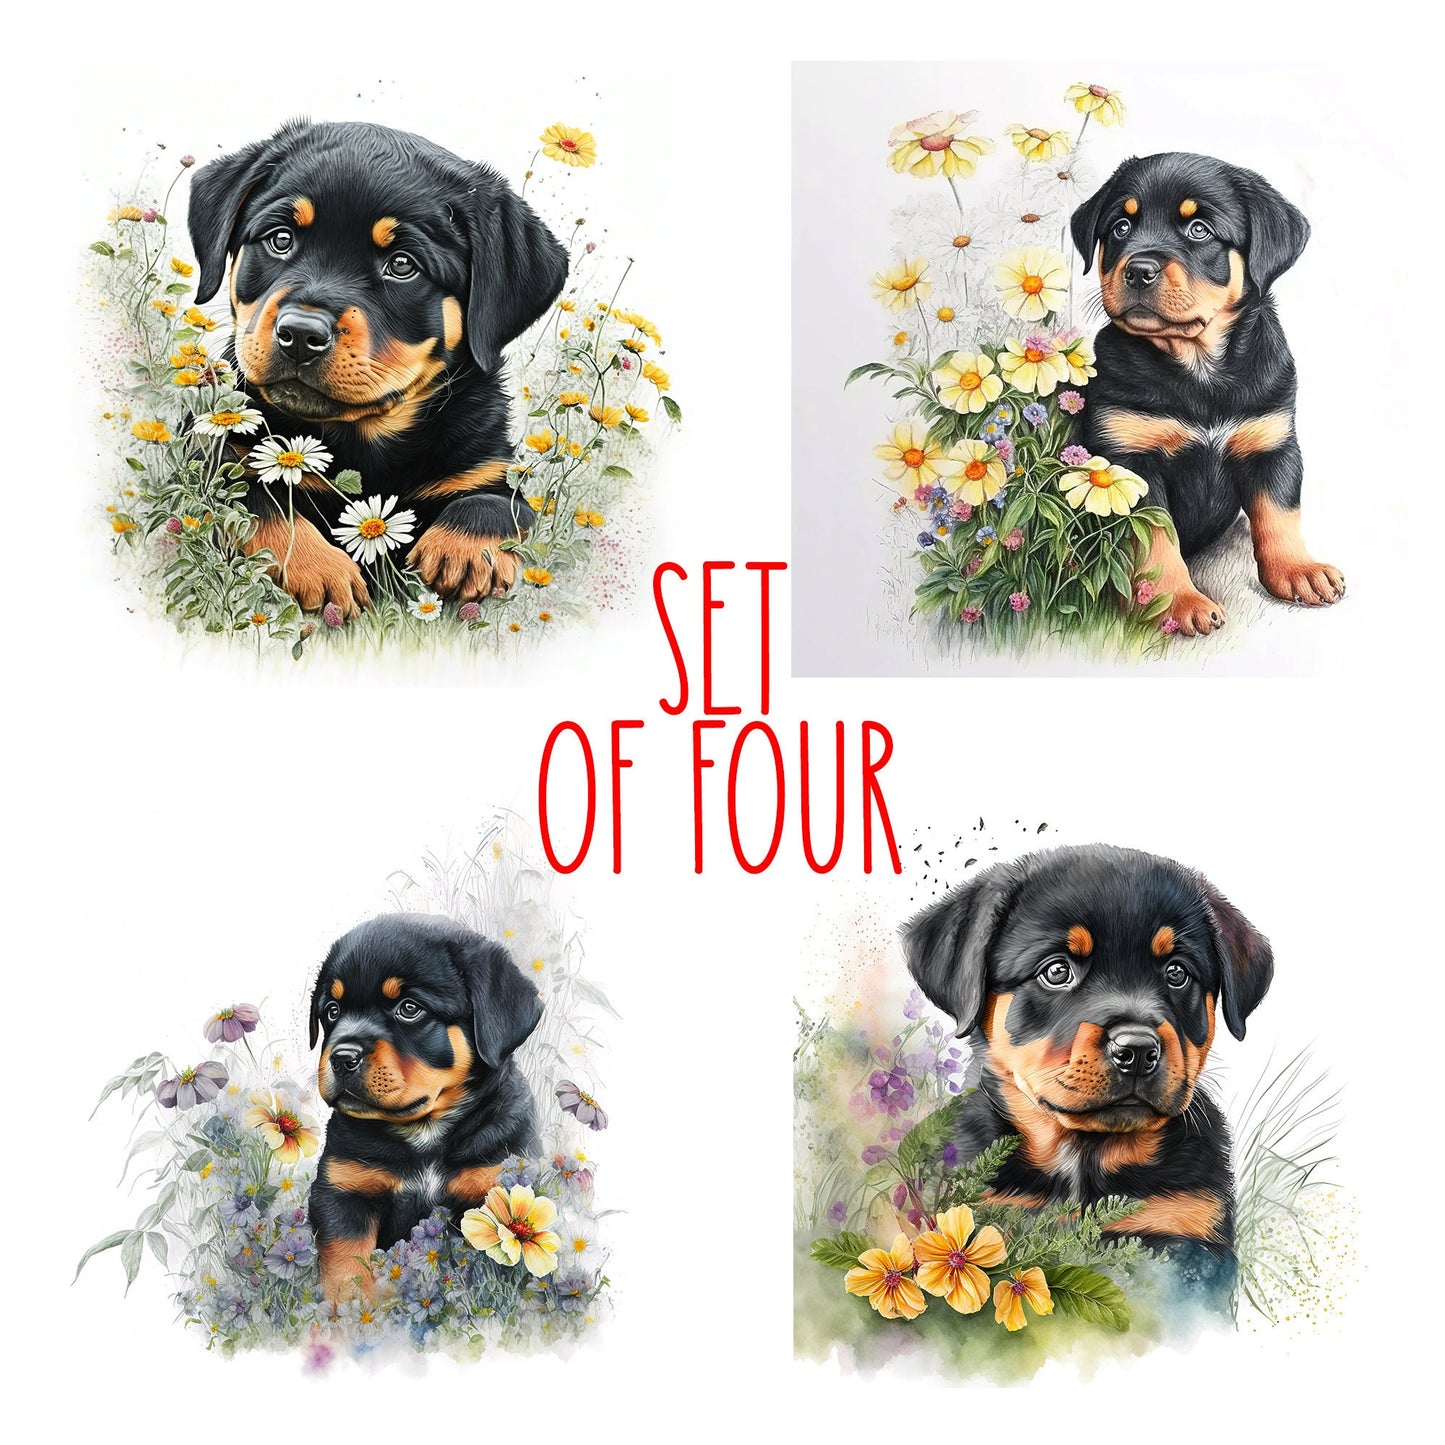 Cute Rottweiler Puppy Art Decorative Ceramic Tile Set with Optional Easel Back - Available in 4 sizes - Set of 4